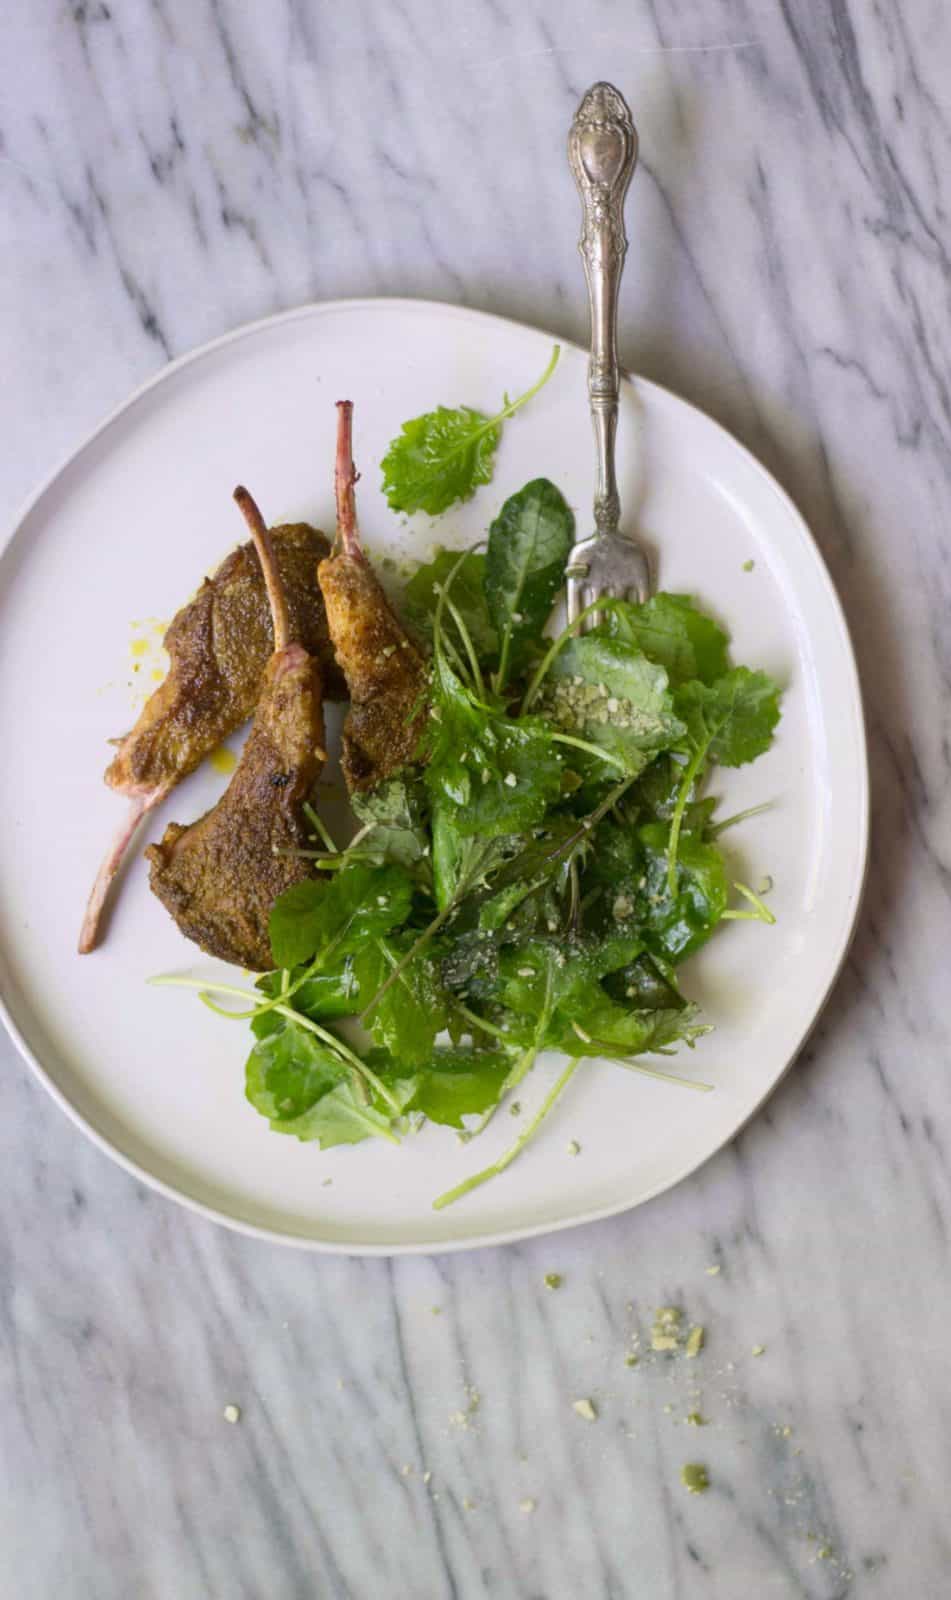 Finished Moroccan Lamb Lollipops with a side of greens on a white plate.